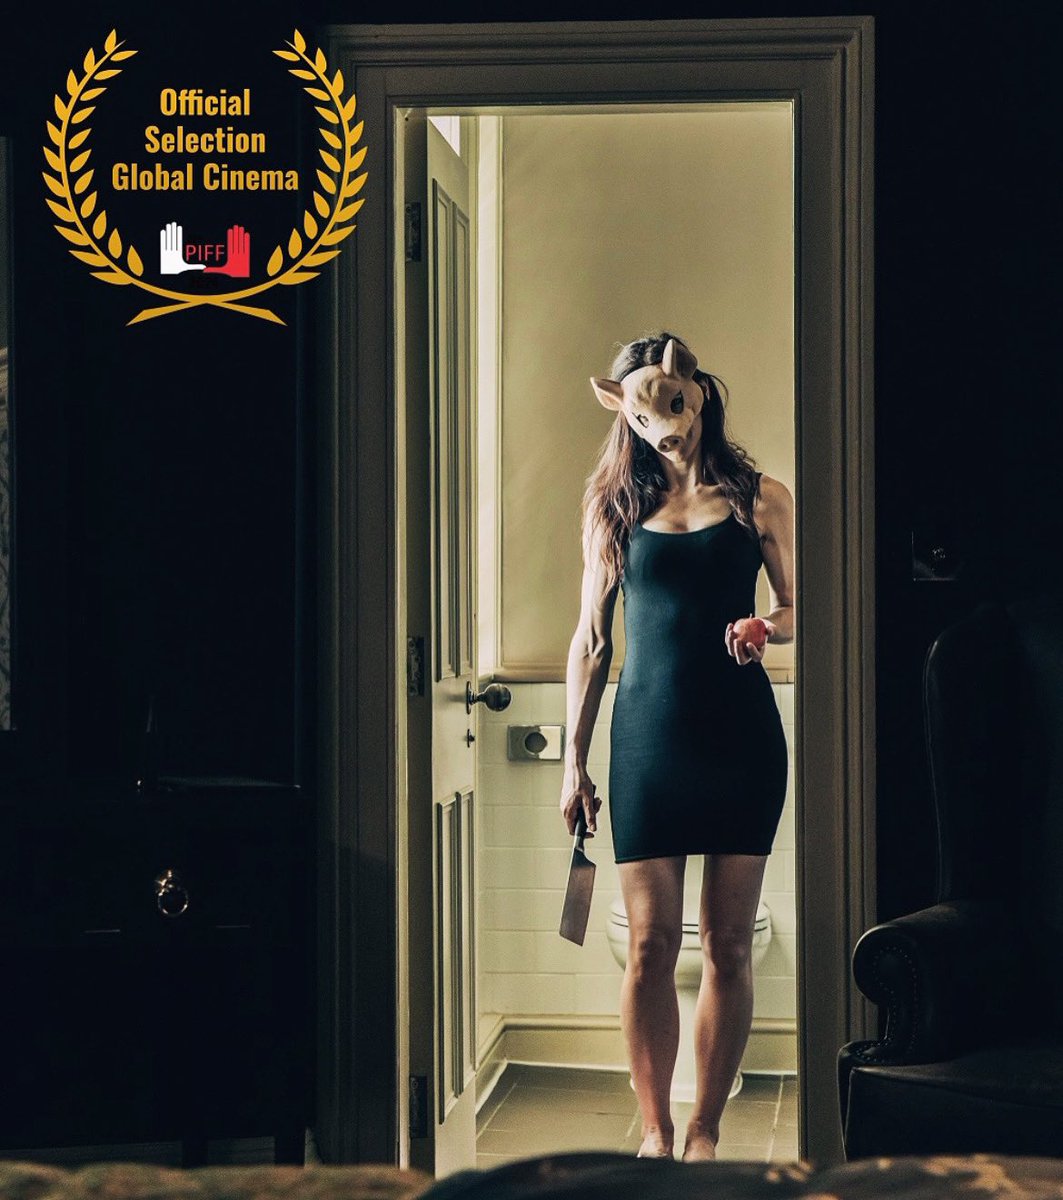 Great start of the year! @SparrowsCall has been selected to screen at @piffindia as part of the Global Cinema category! 🥳🎥💫 #filmfestival #featurefilm #sparrowscall #SupportIndieFilm #HappyNewYear